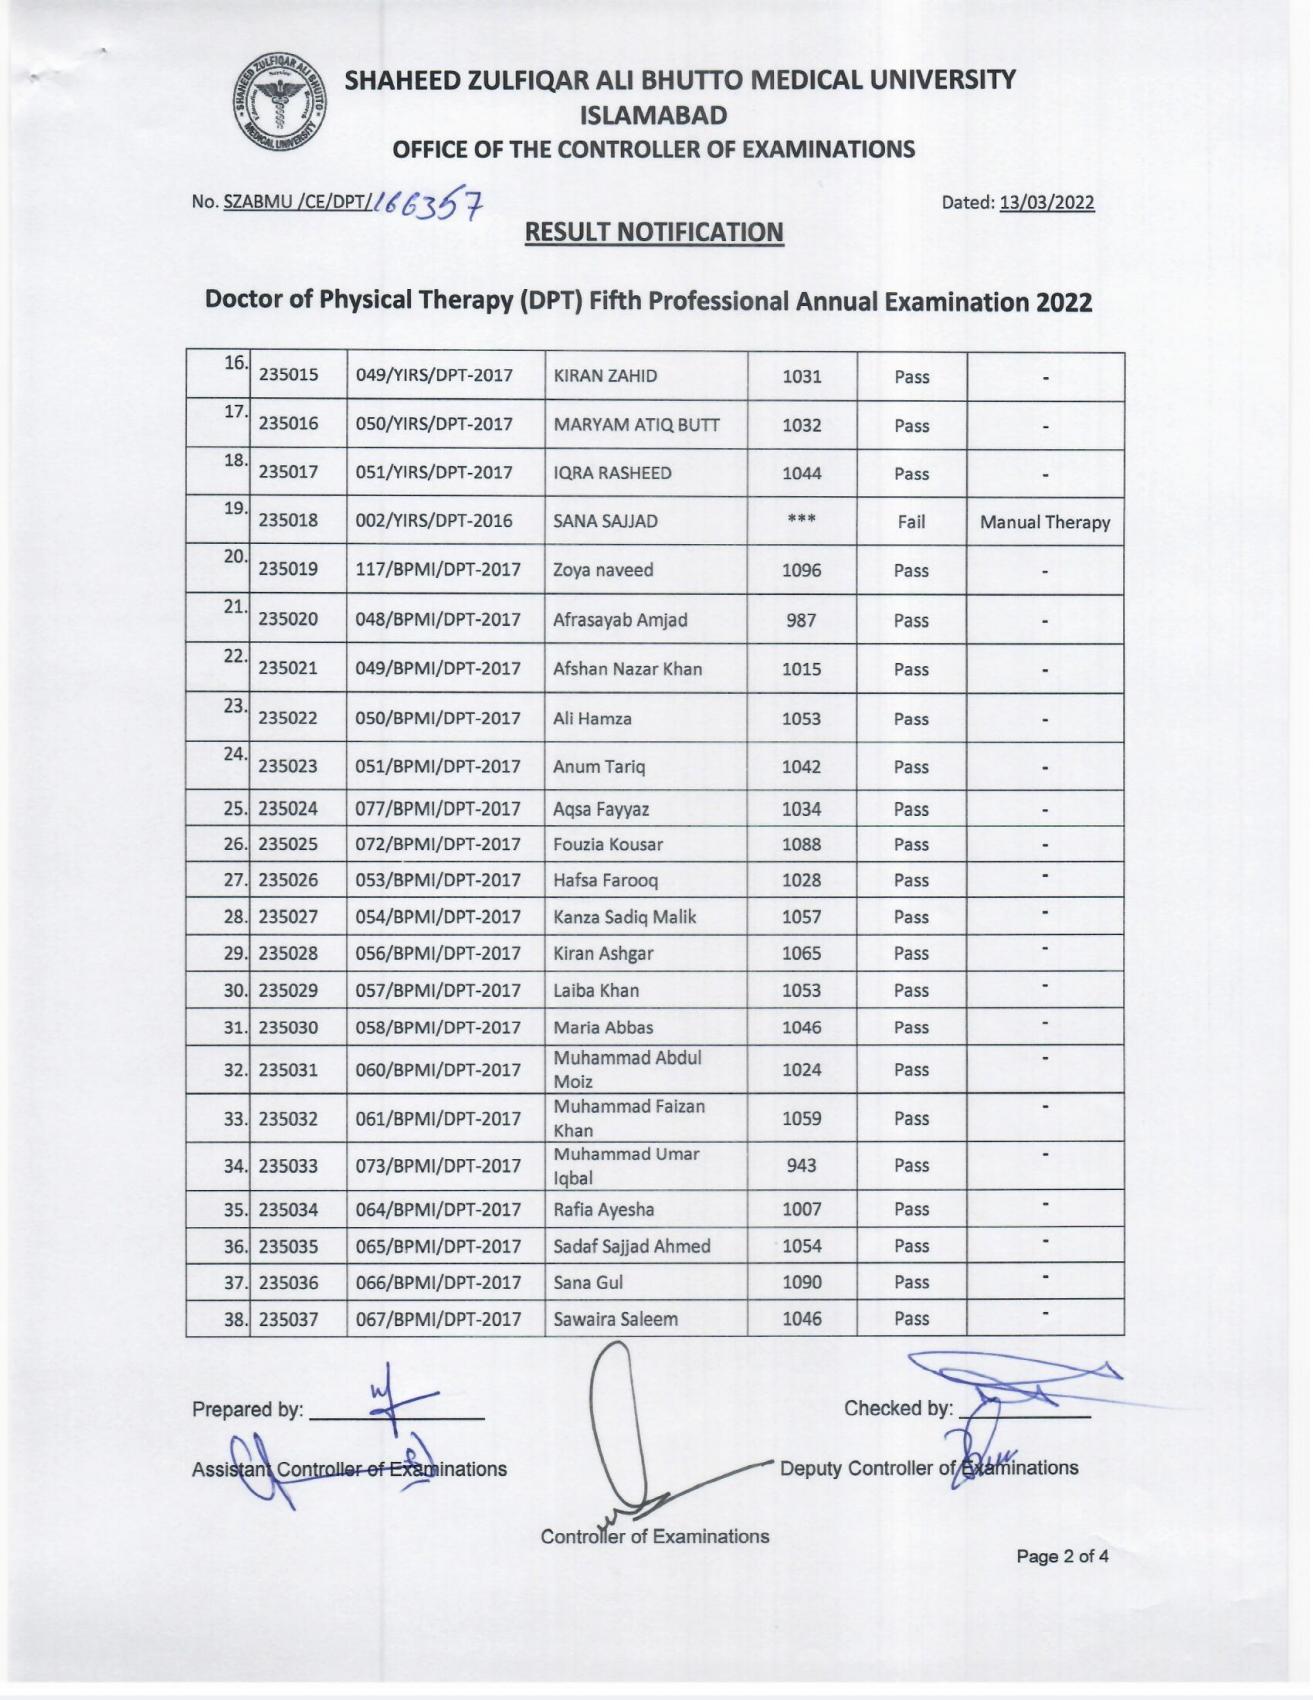 Result Notification - DPT Fifth Professional Annual Examination 2022